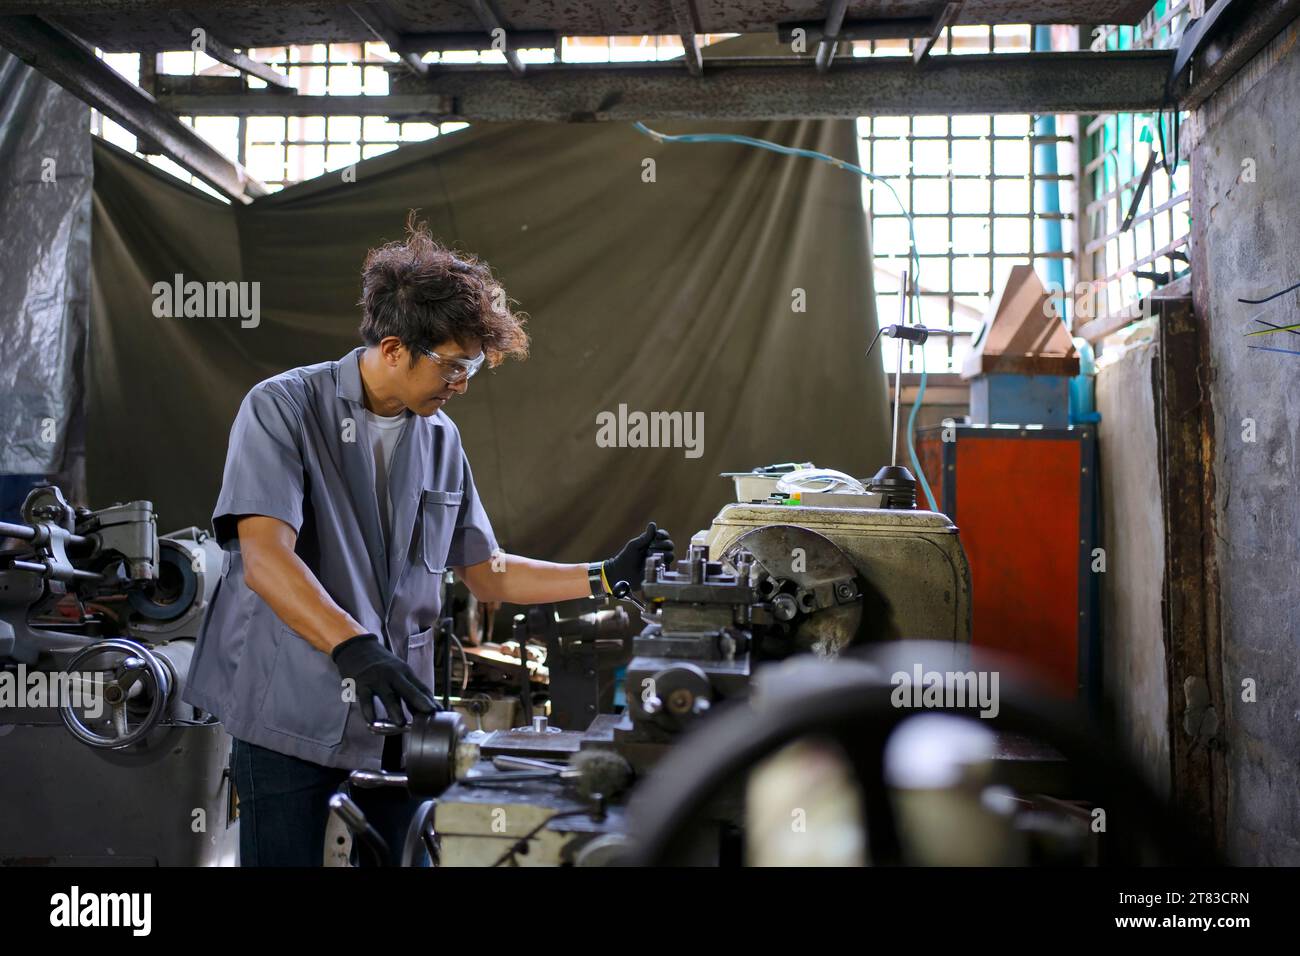 Trainee works at machine shop. Metalwork and education concept. Stock Photo